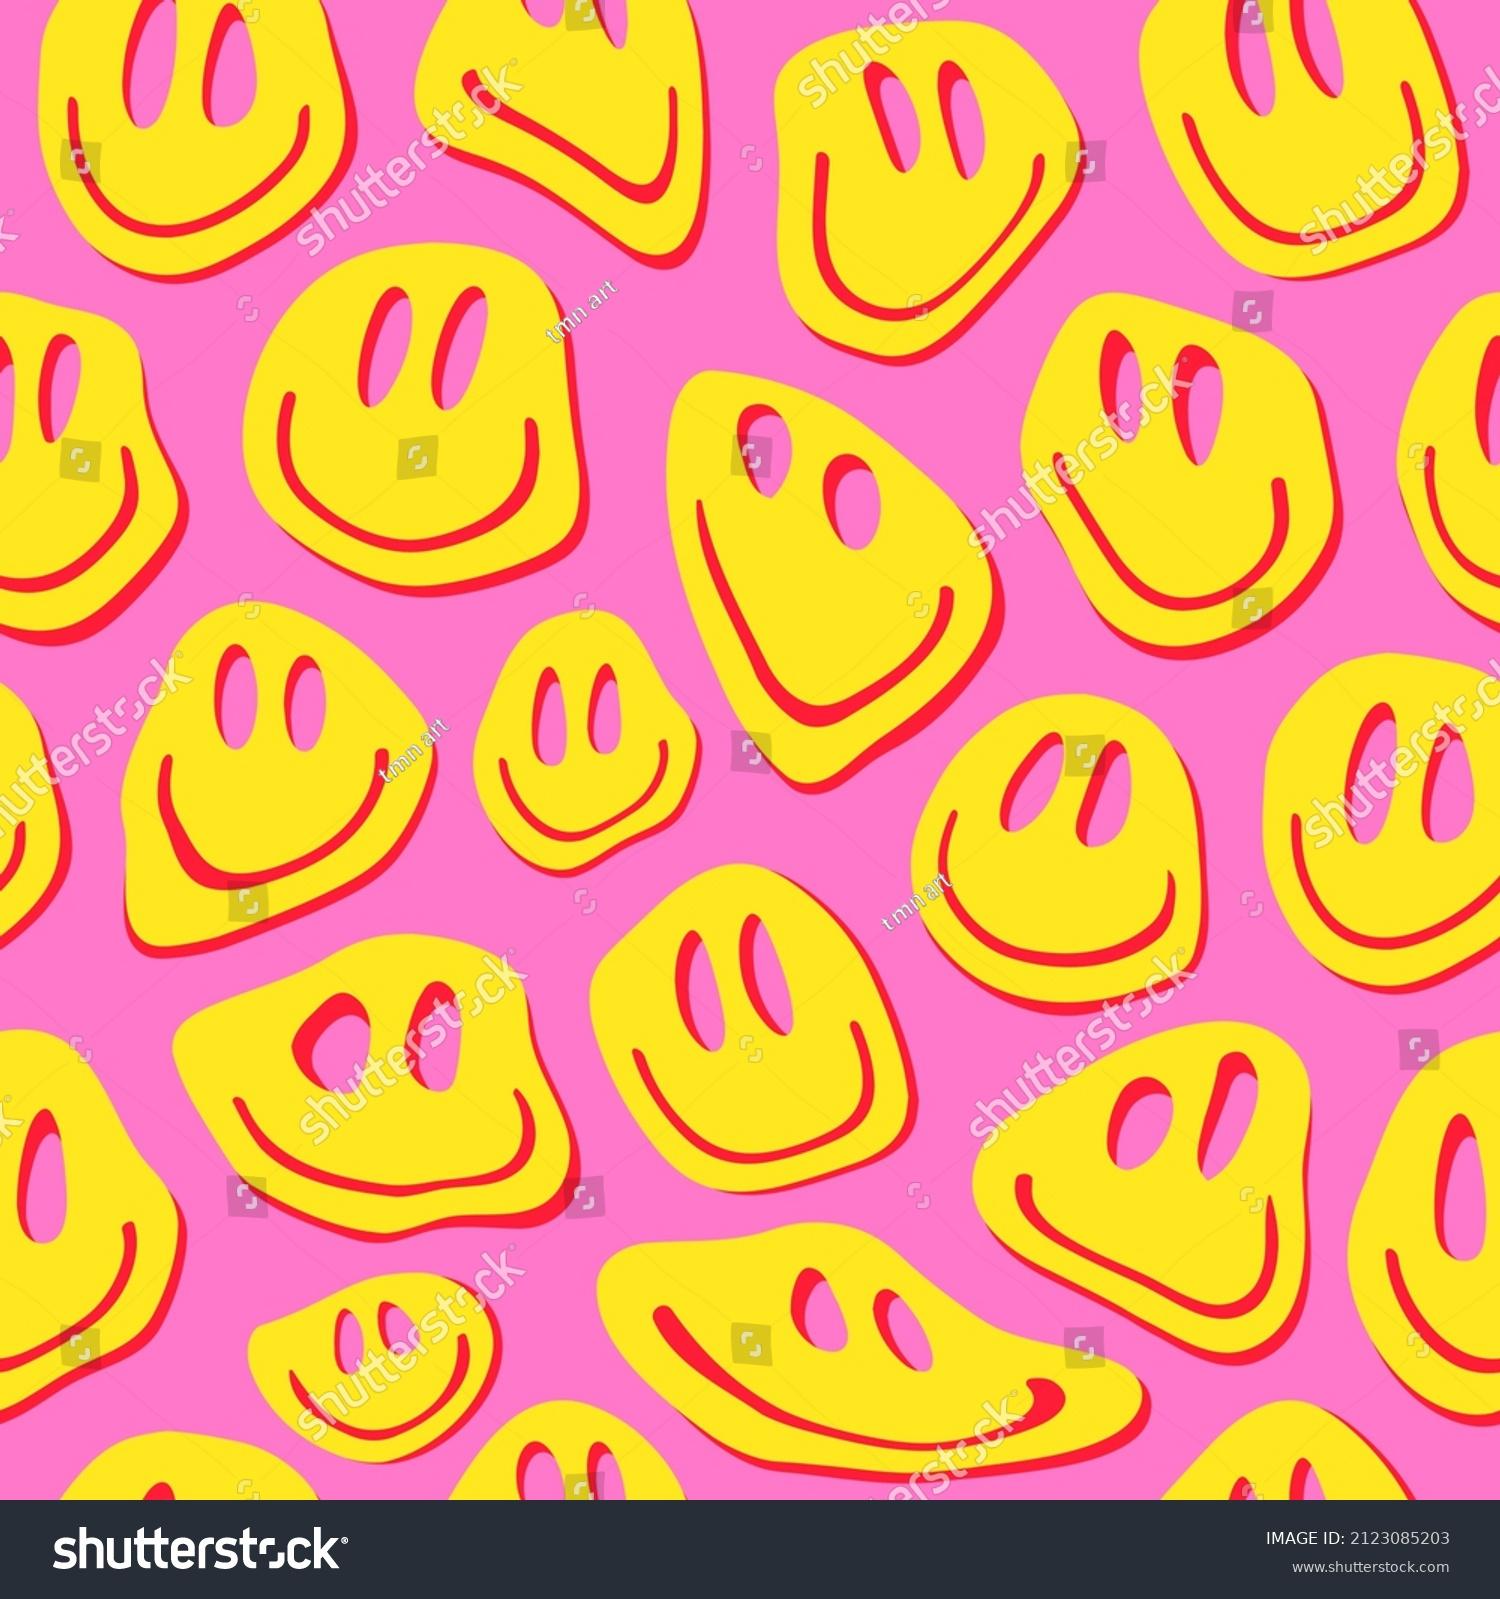 Cool Trendy Groovy Smile Seamless Pattern Stock Vector Royalty